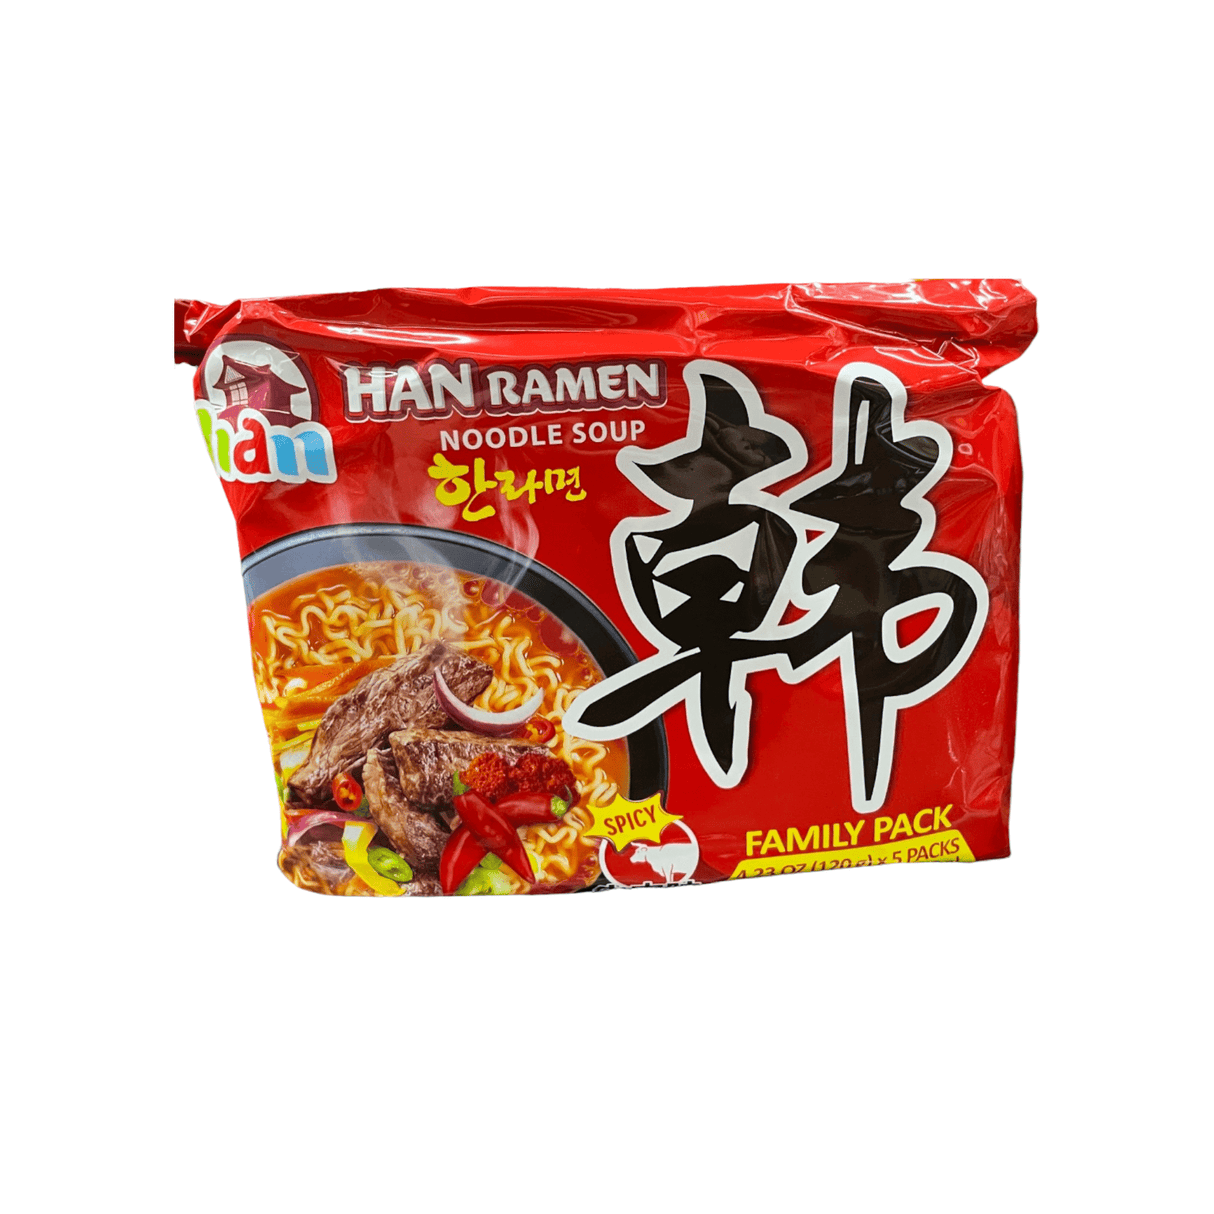 Han Ramen Noodle Soup Spicy Beef Family Pack